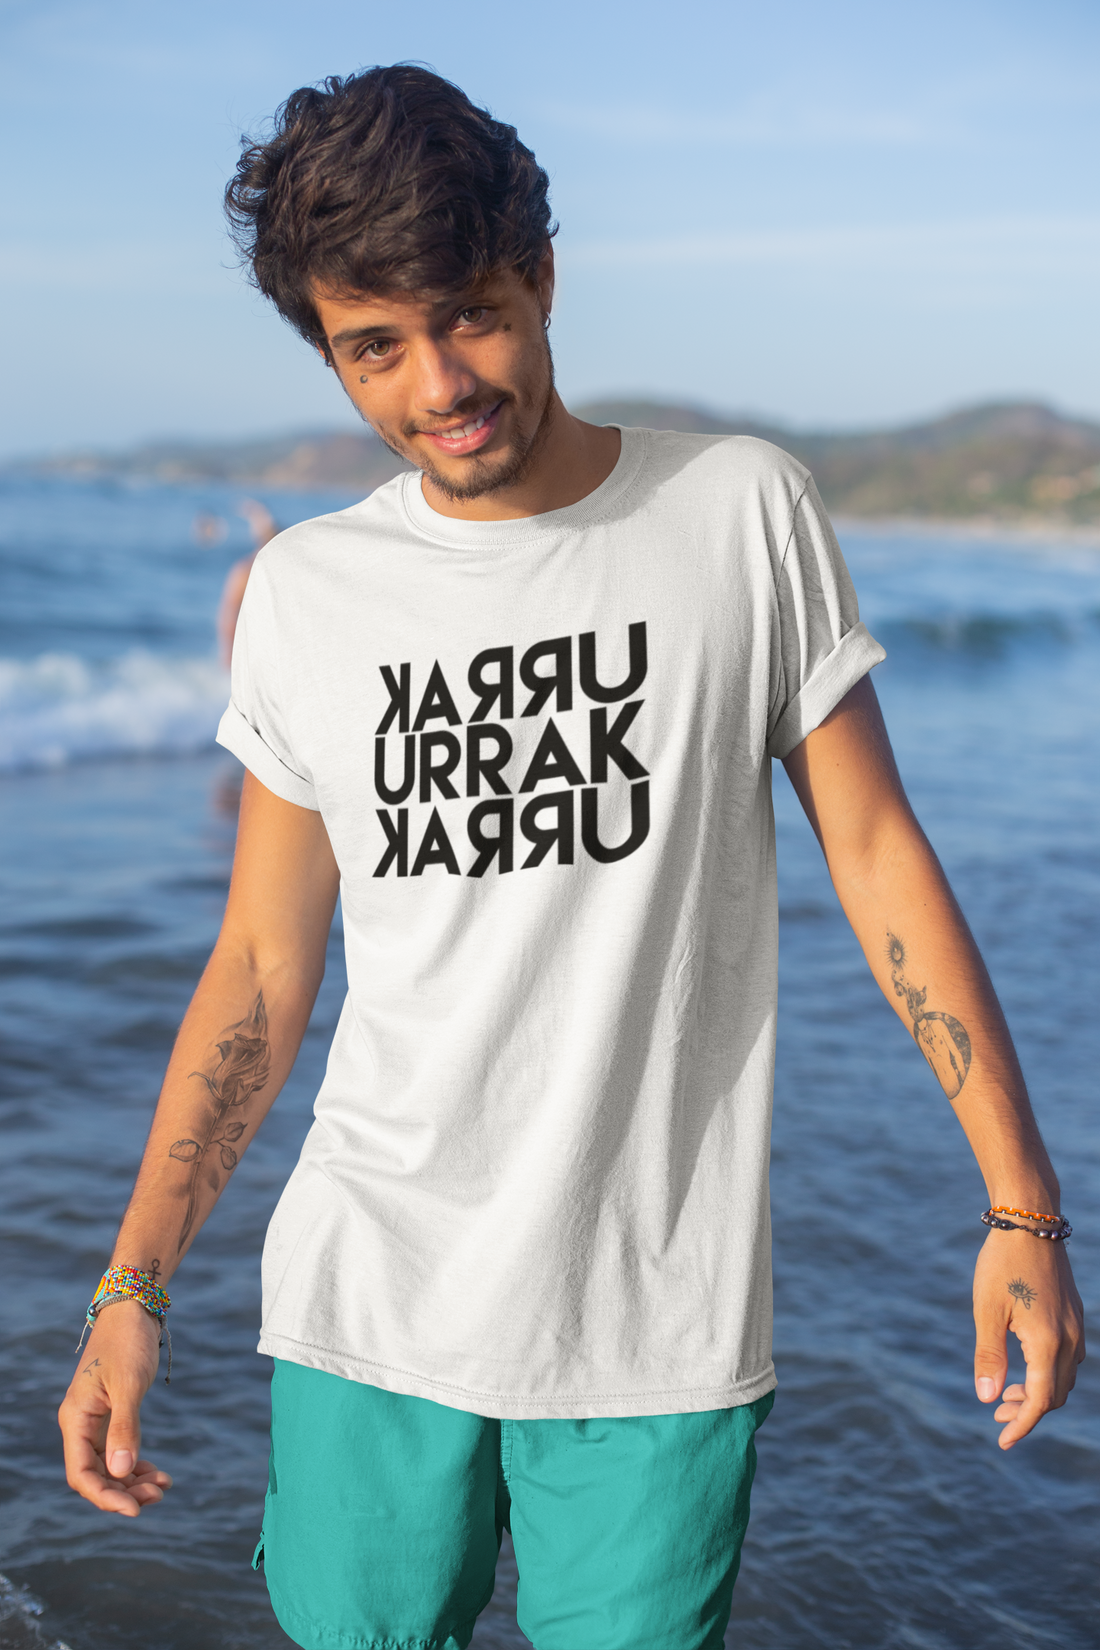 Discover Goa's Charm with Our Unique T-Shirt Collection